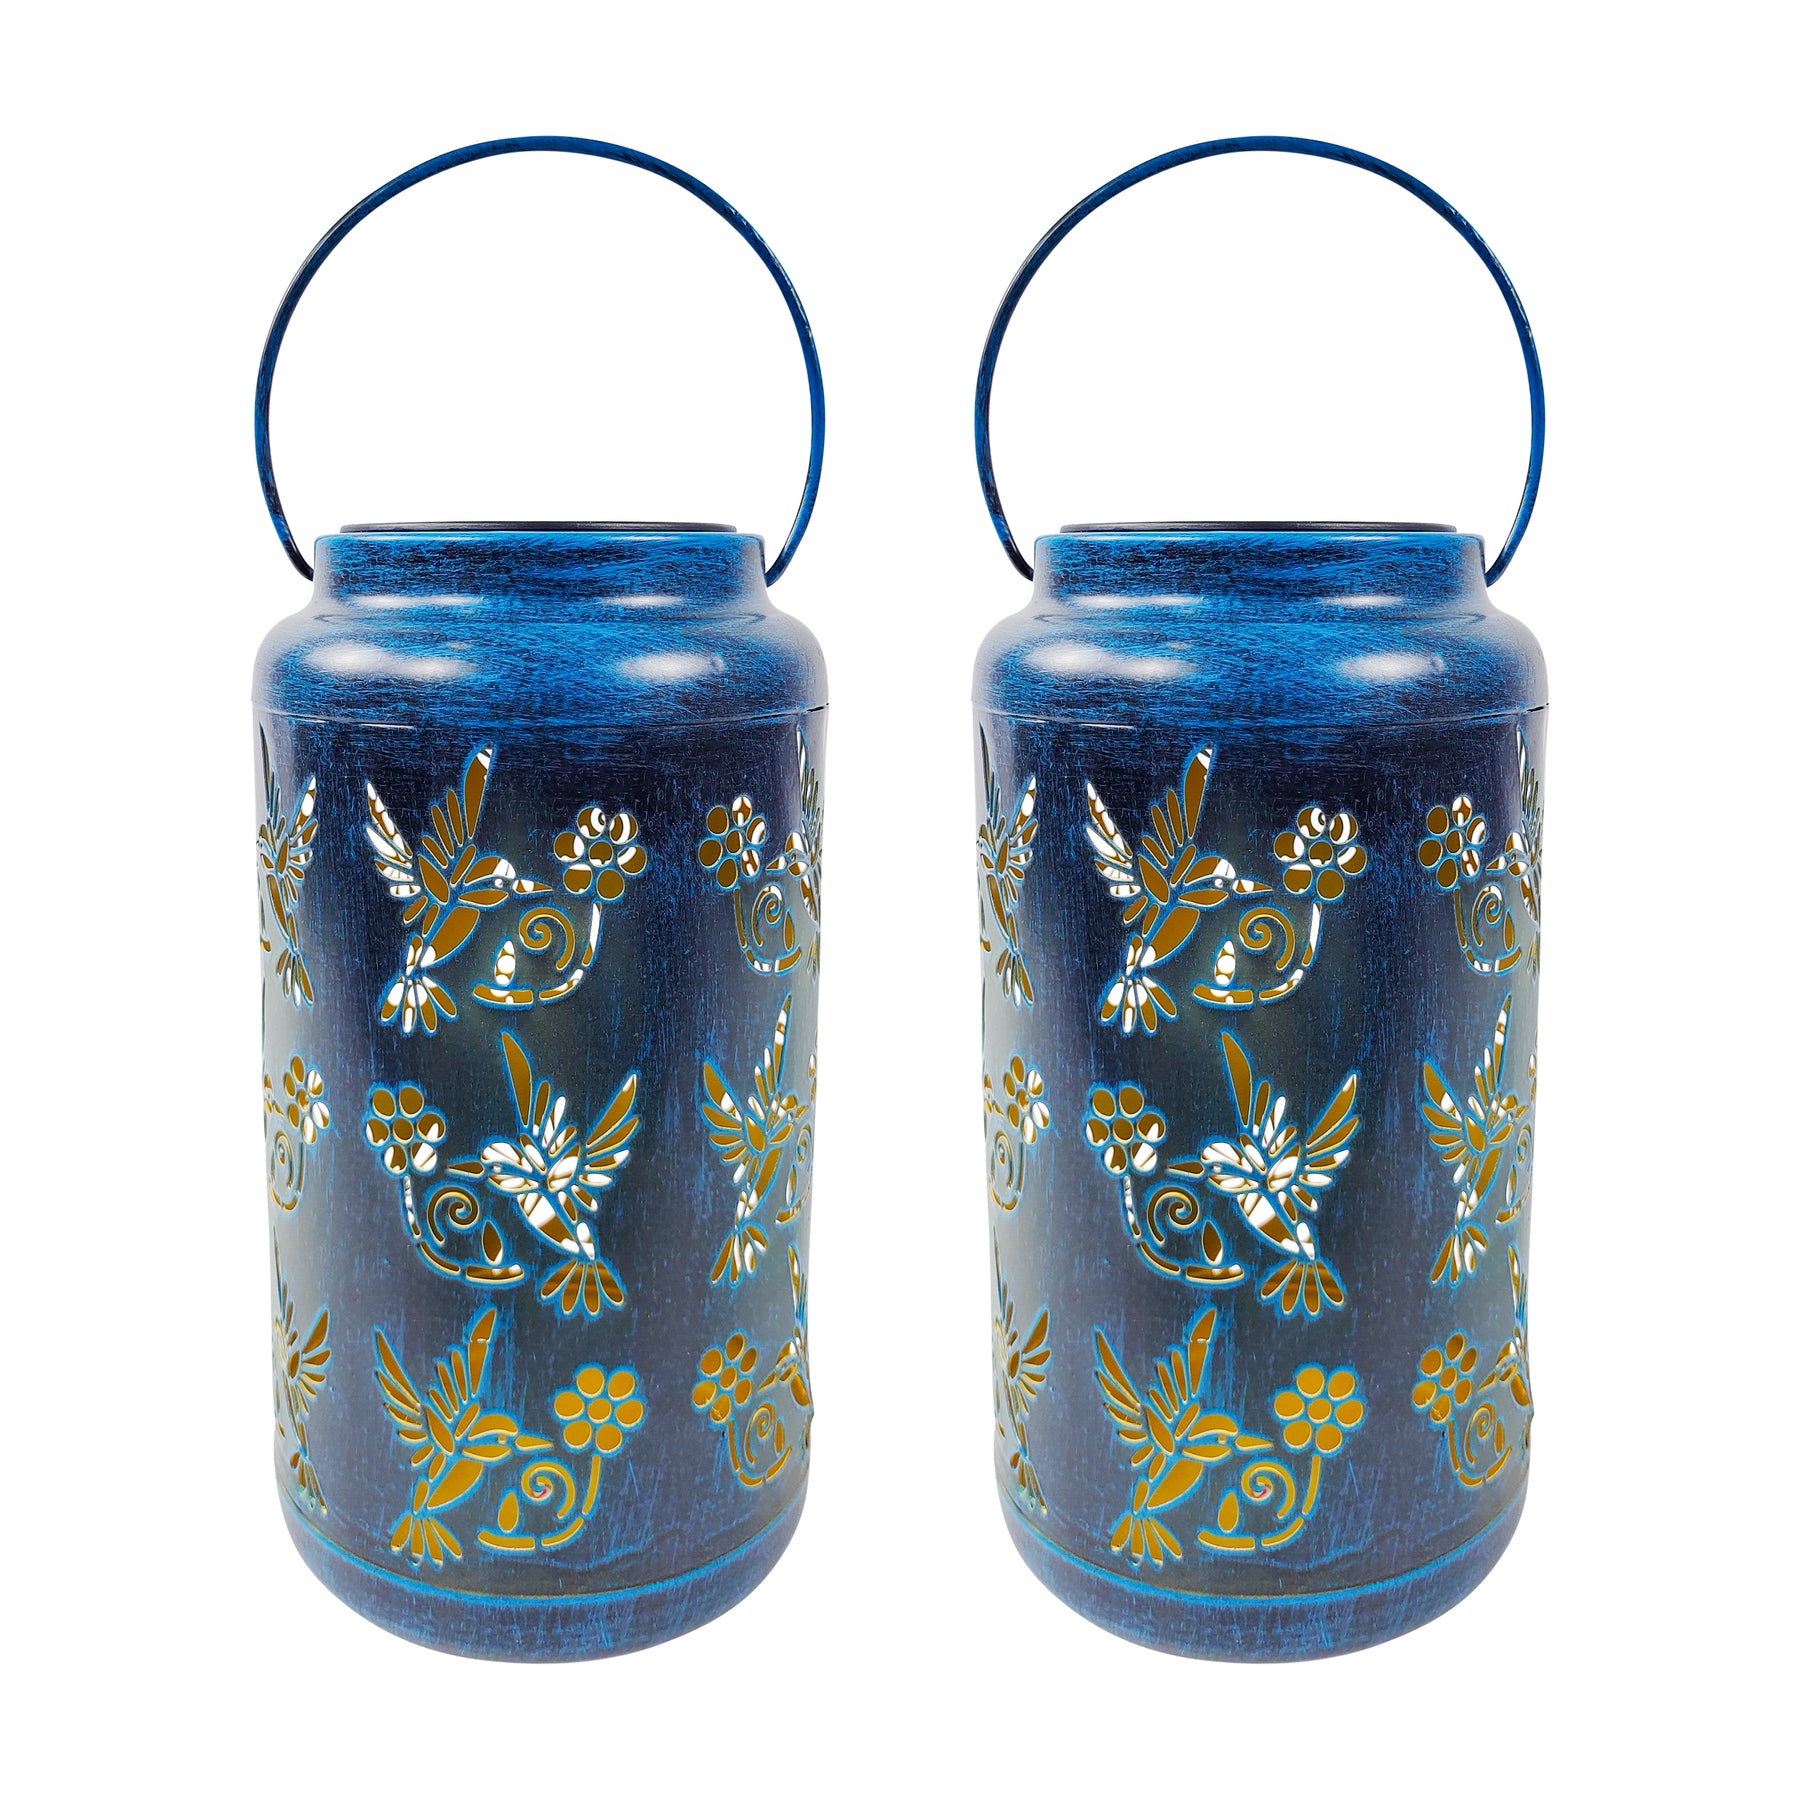 Bliss Outdoors 9-inch Tall 2-Pack Hanging and Tabletop Decorative Solar LED Lantern with Unique Humming Bird Design and Antique Hand Painted Finish in the brushed blue variation.